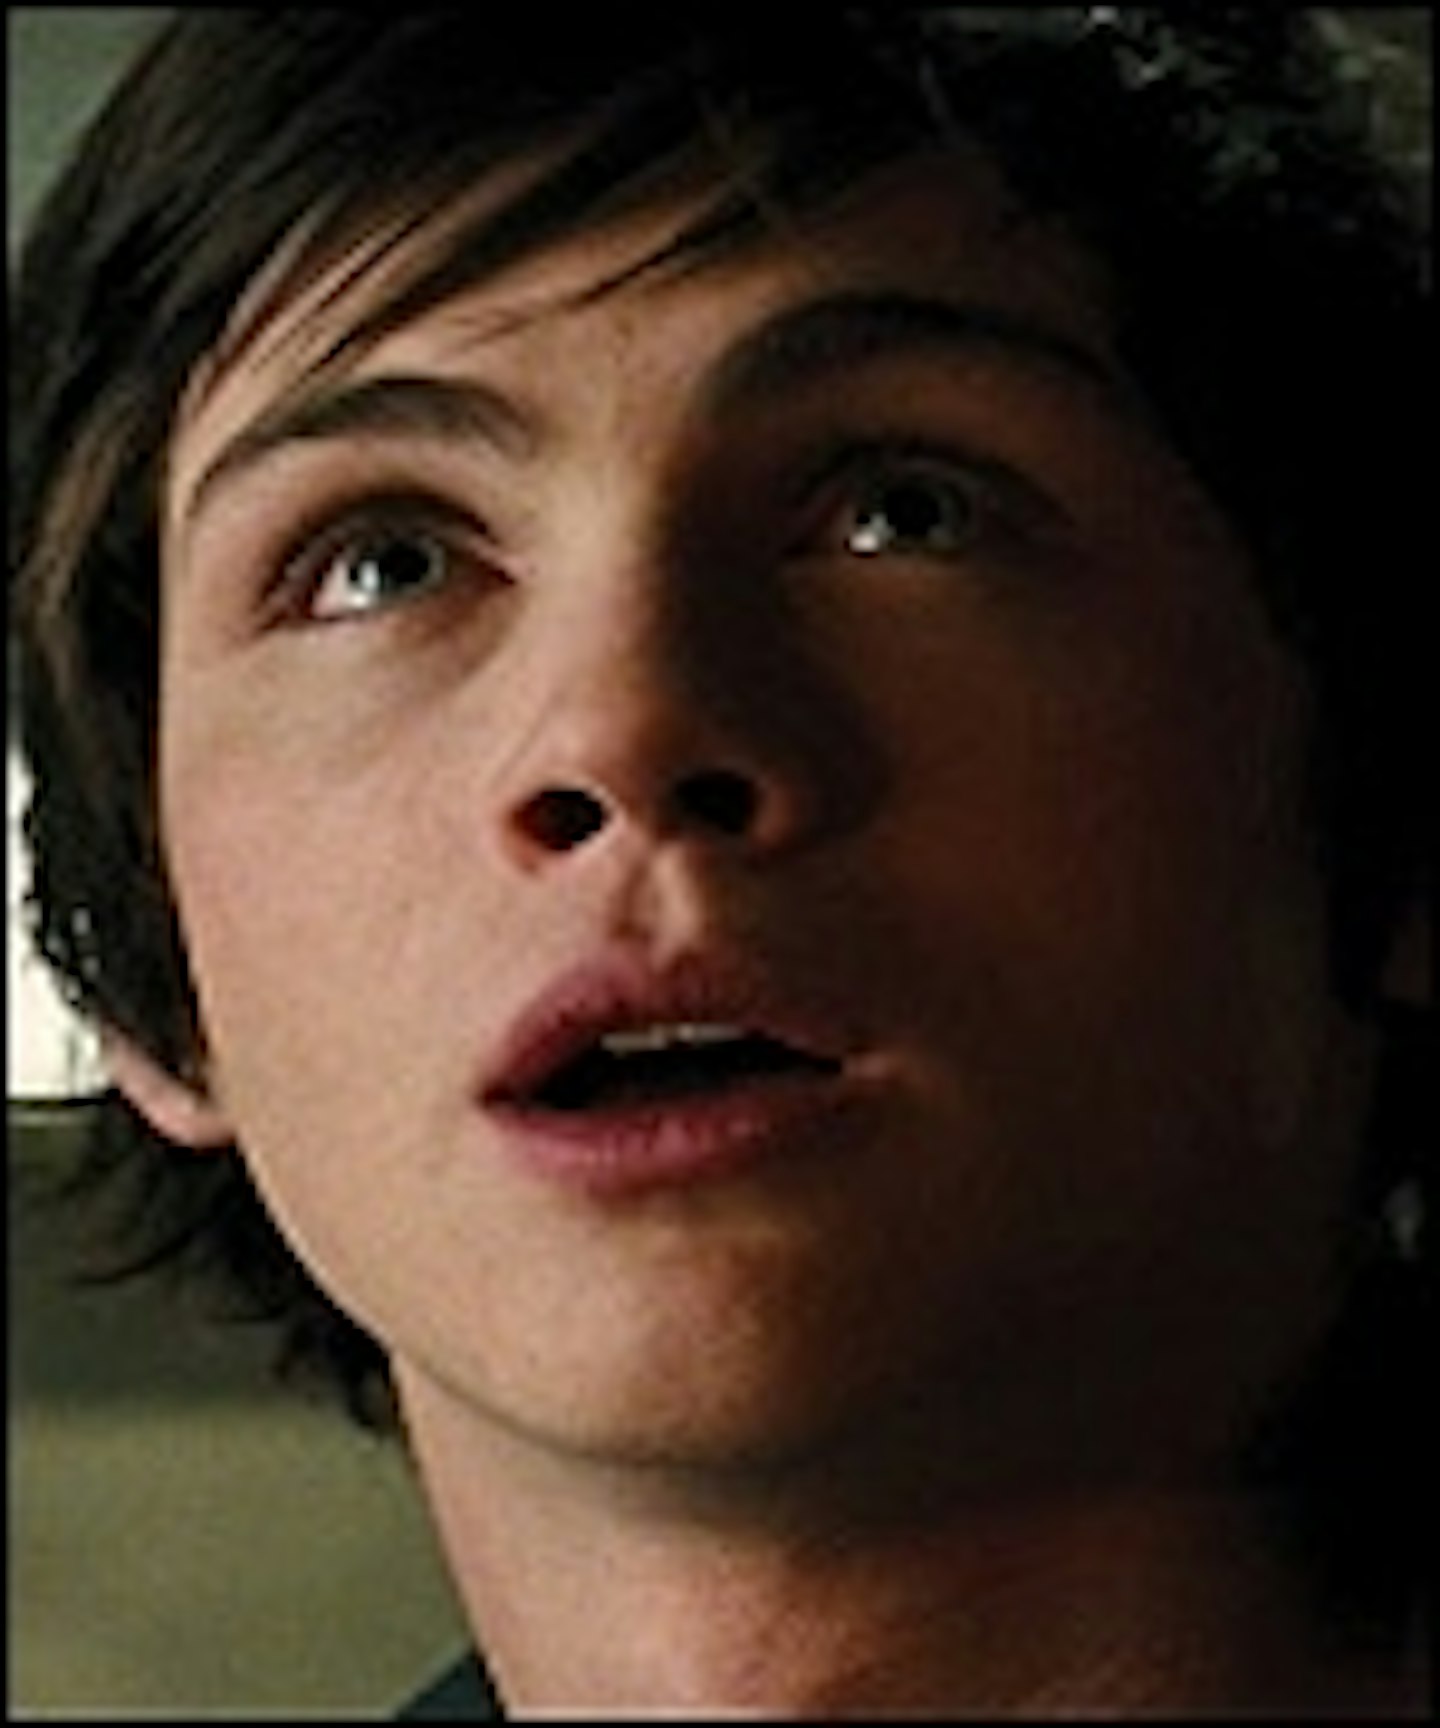 Second Percy Jackson Trailer Goes Up